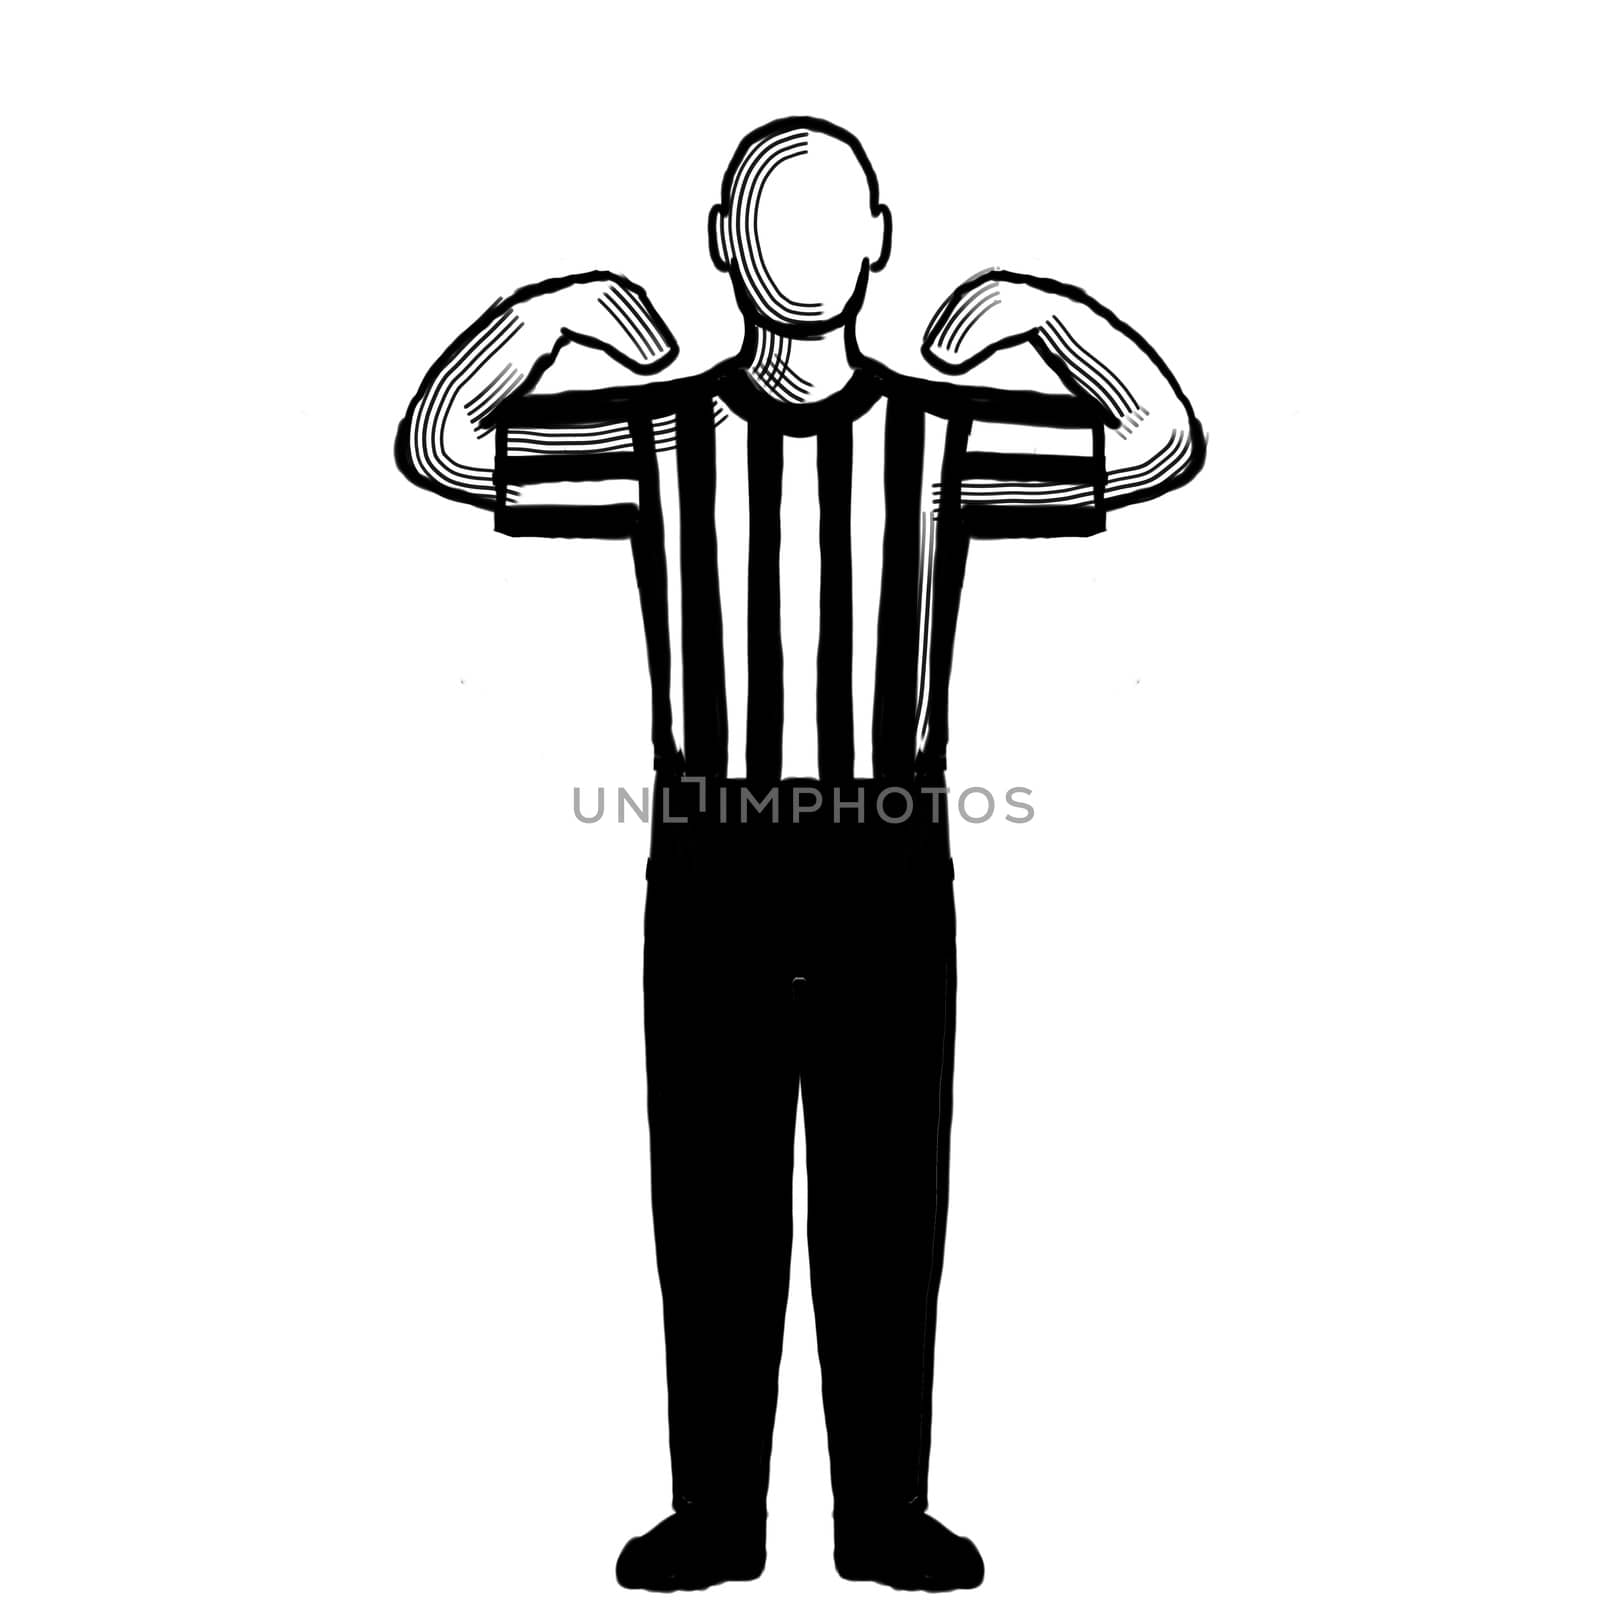 Black and white illustration of a basketball referee or official with hand signal showing 30-second time-out viewed from front on isolated background done retro style.